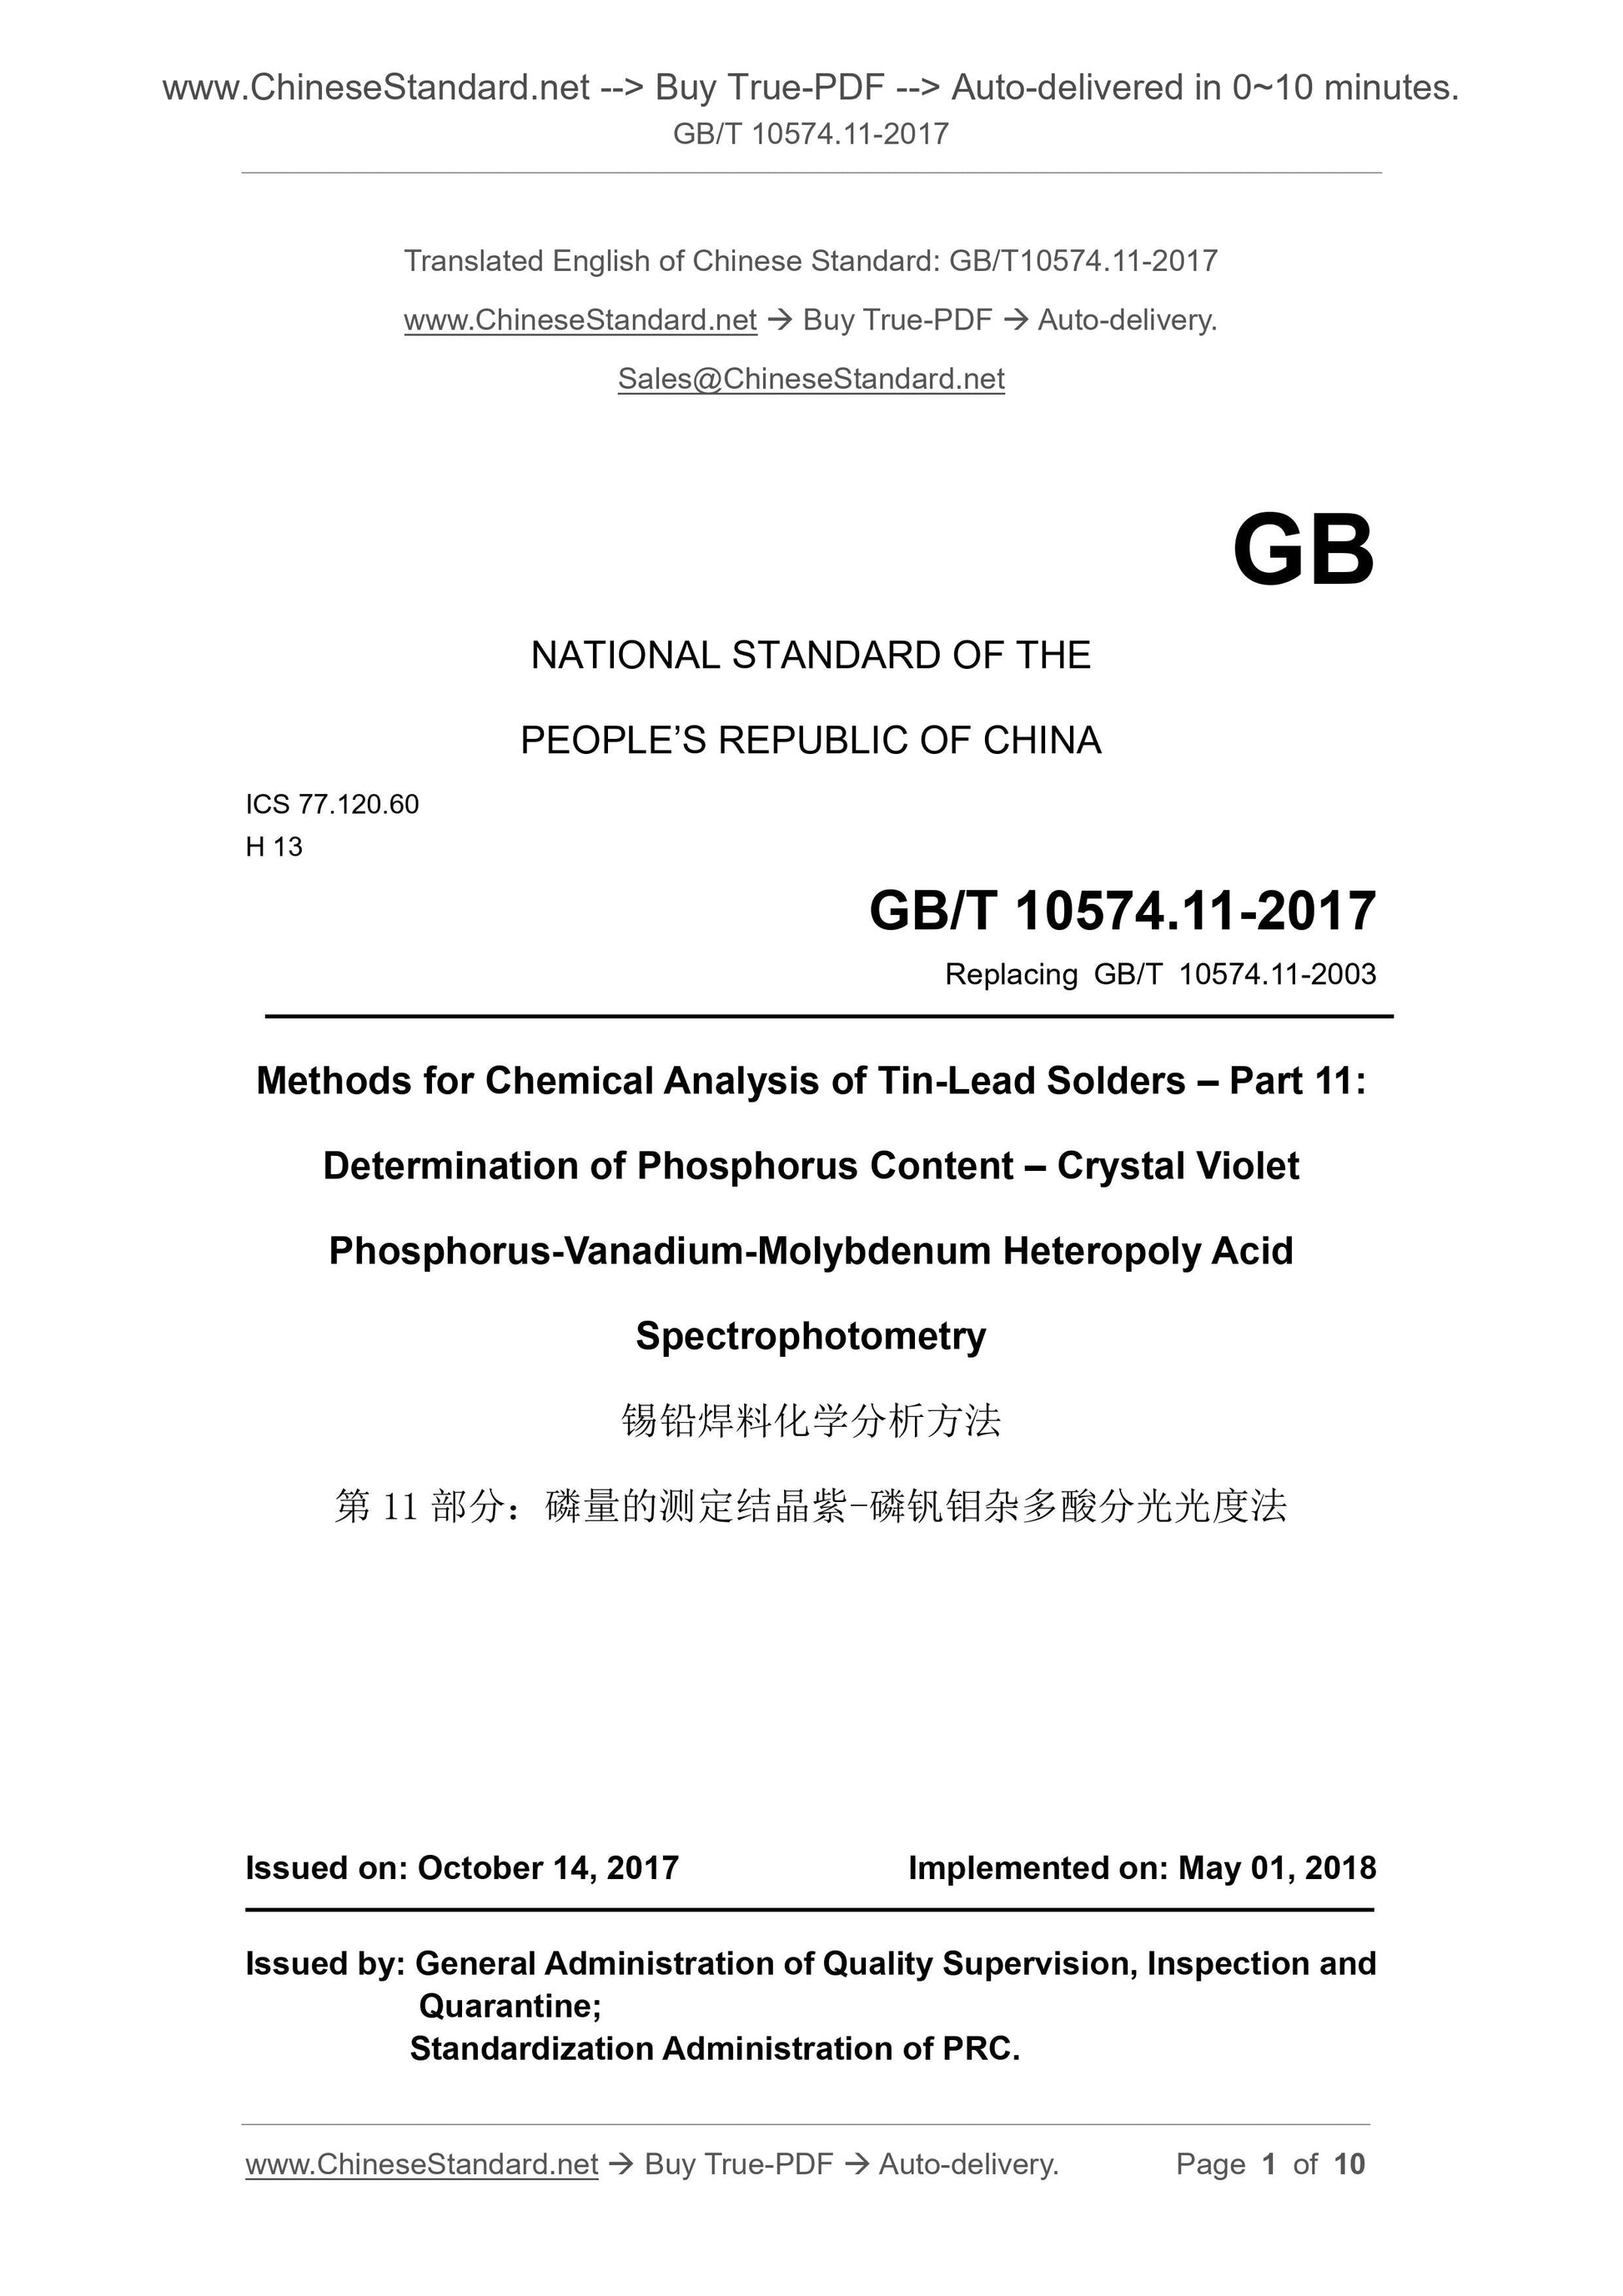 GB/T 10574.11-2017 Page 1